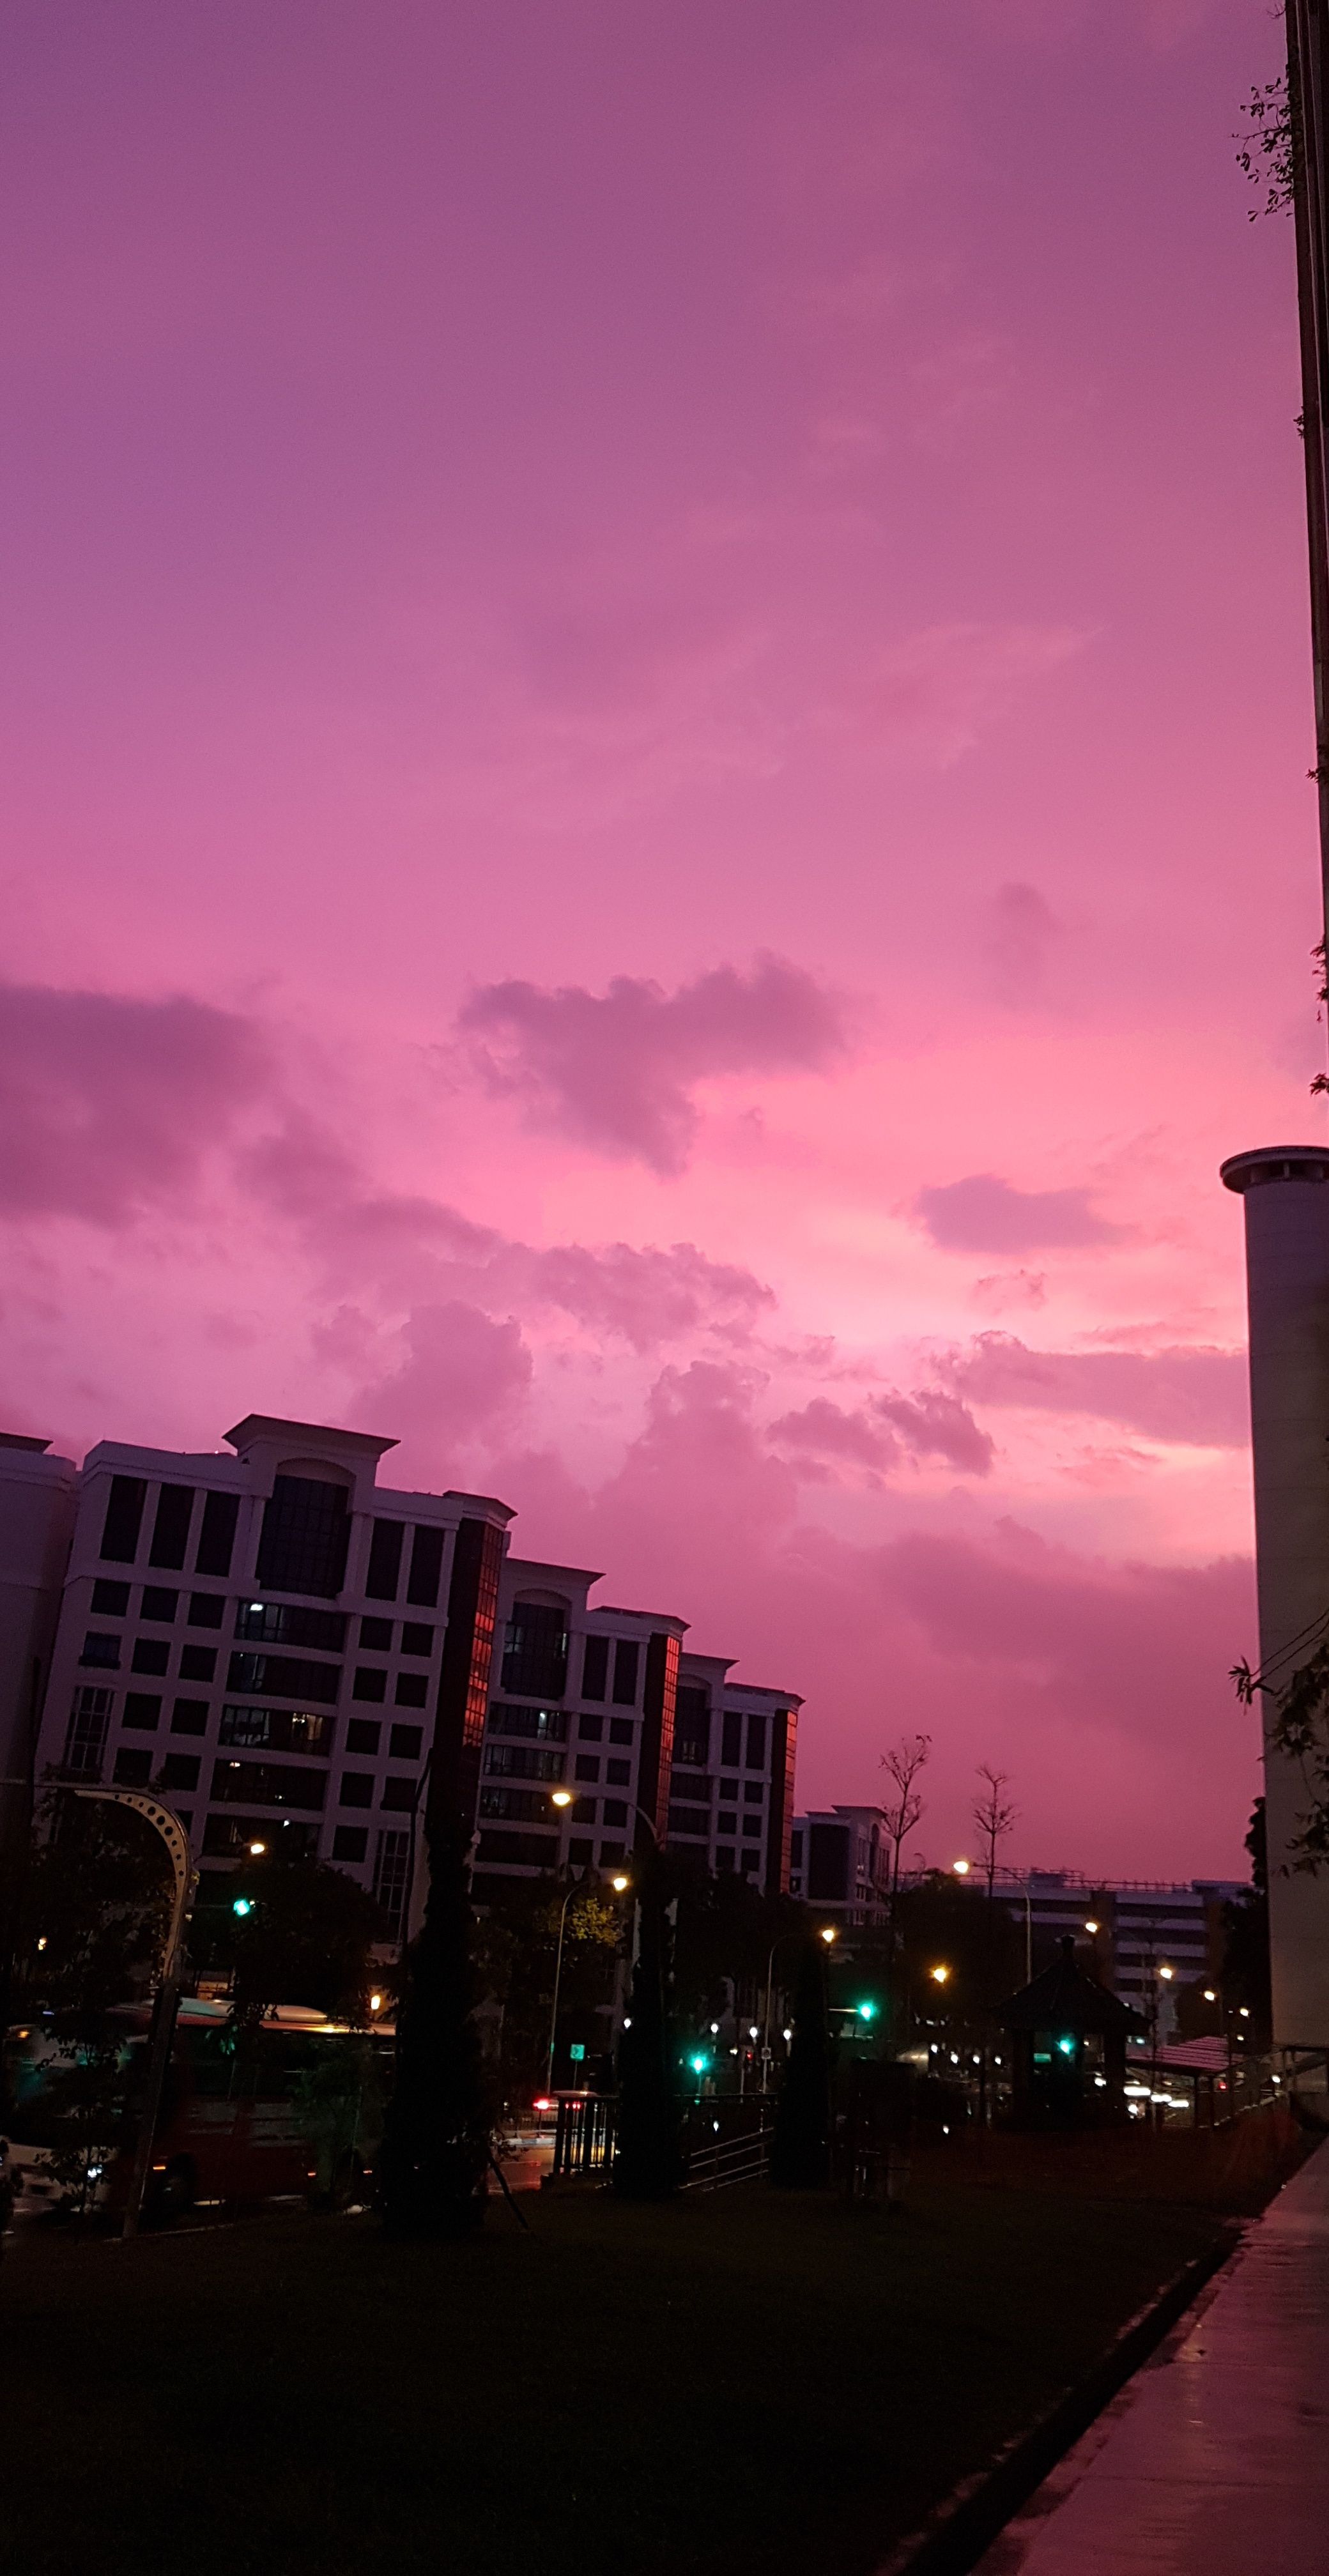 The pink sunset in Singapore yesterday.